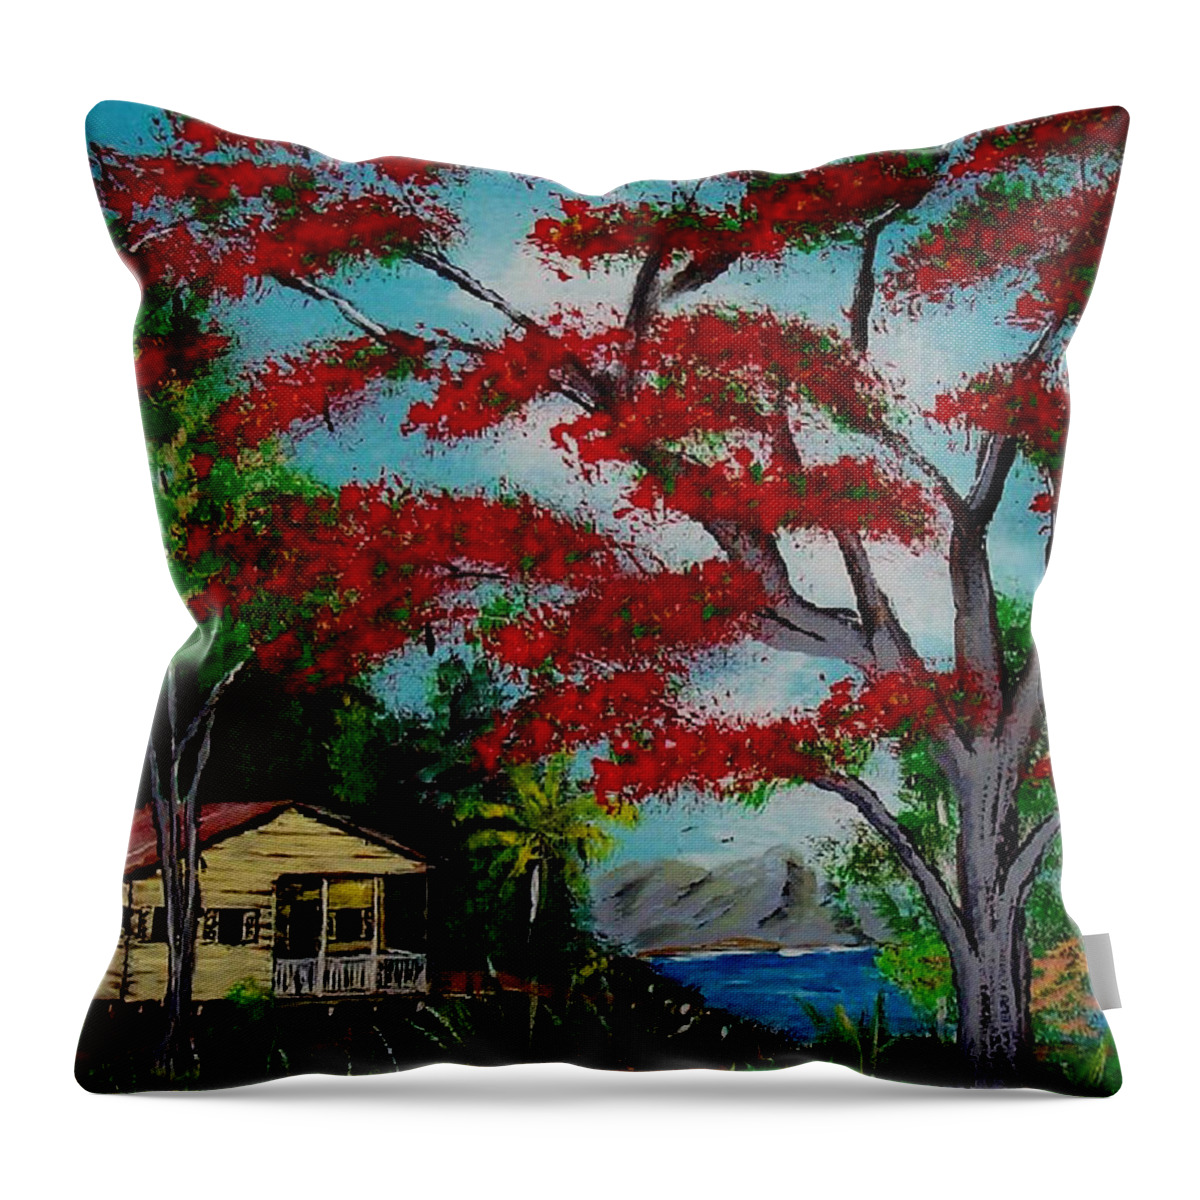 Flamboyant Tree Throw Pillow featuring the painting Big Red by Luis F Rodriguez